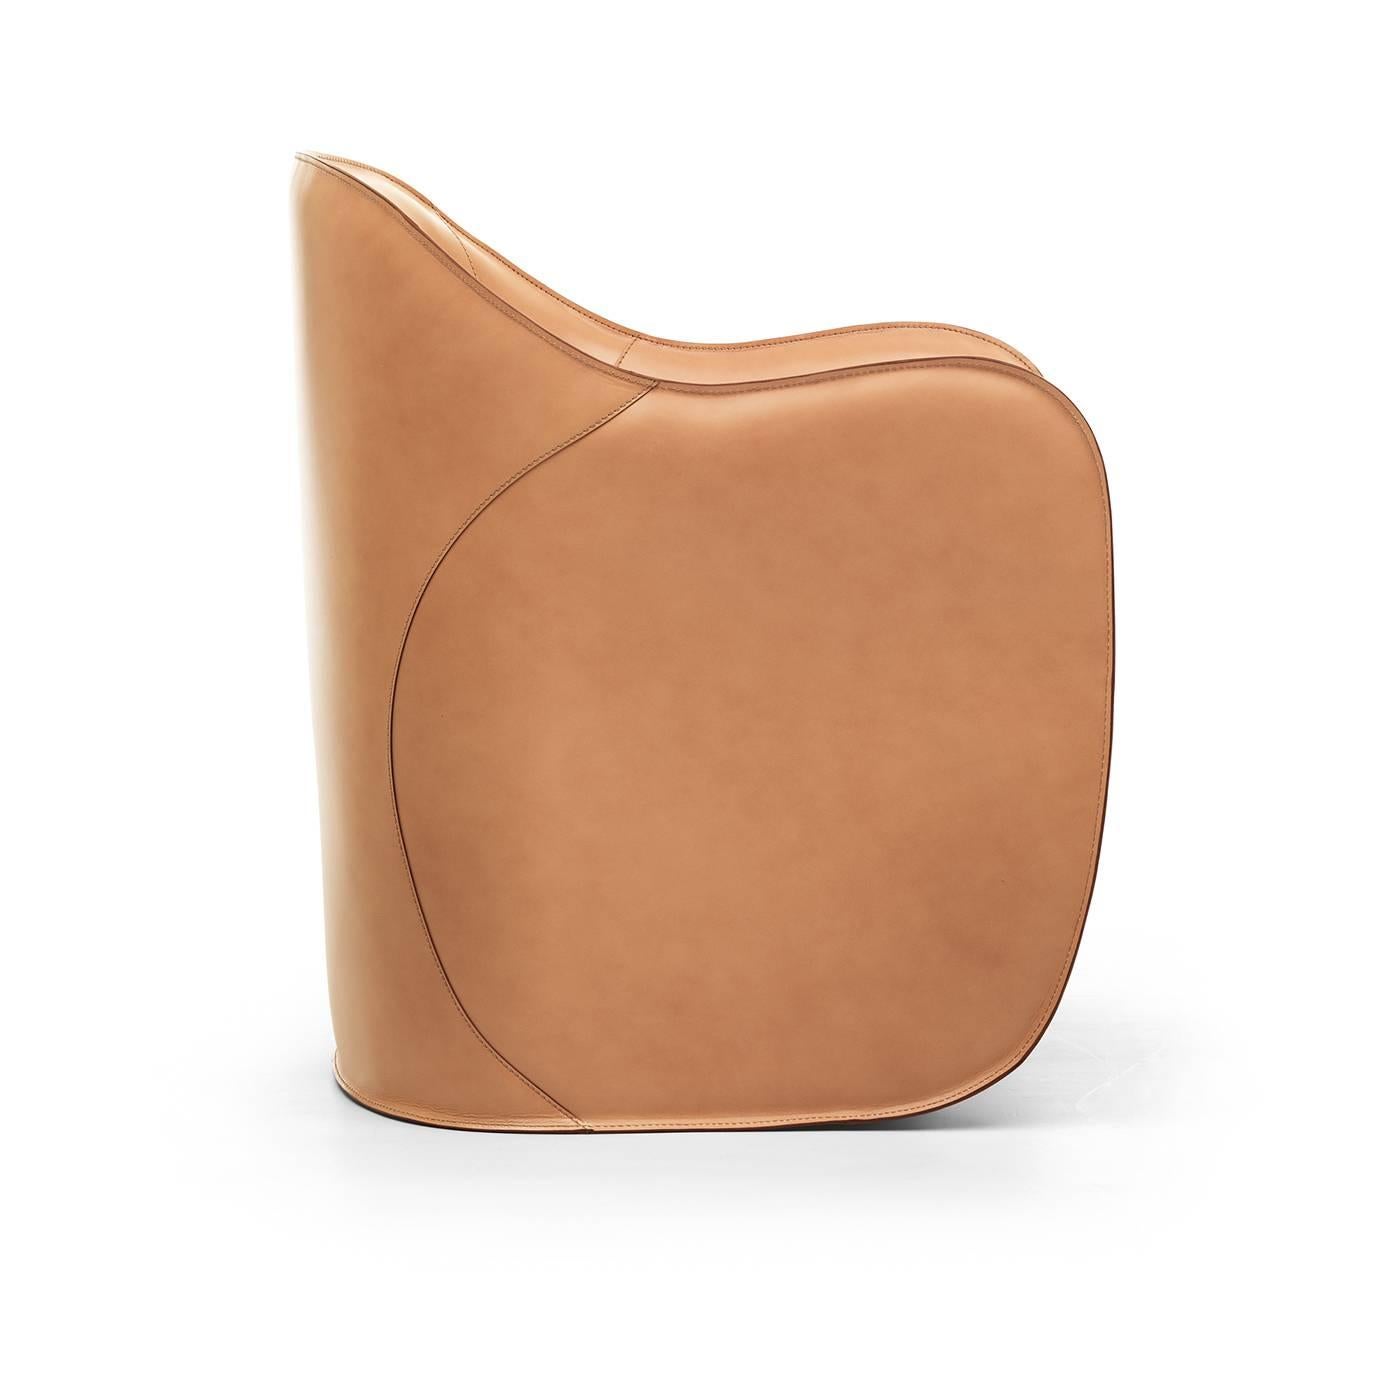 Designed by Alberto Colzani in 2013, this set of armchair and ottoman will add sophistication and a pop of color to a modern living room or study. The polyurethane core creates the sinuous, enveloping shape of the chair, that is mirrored in the